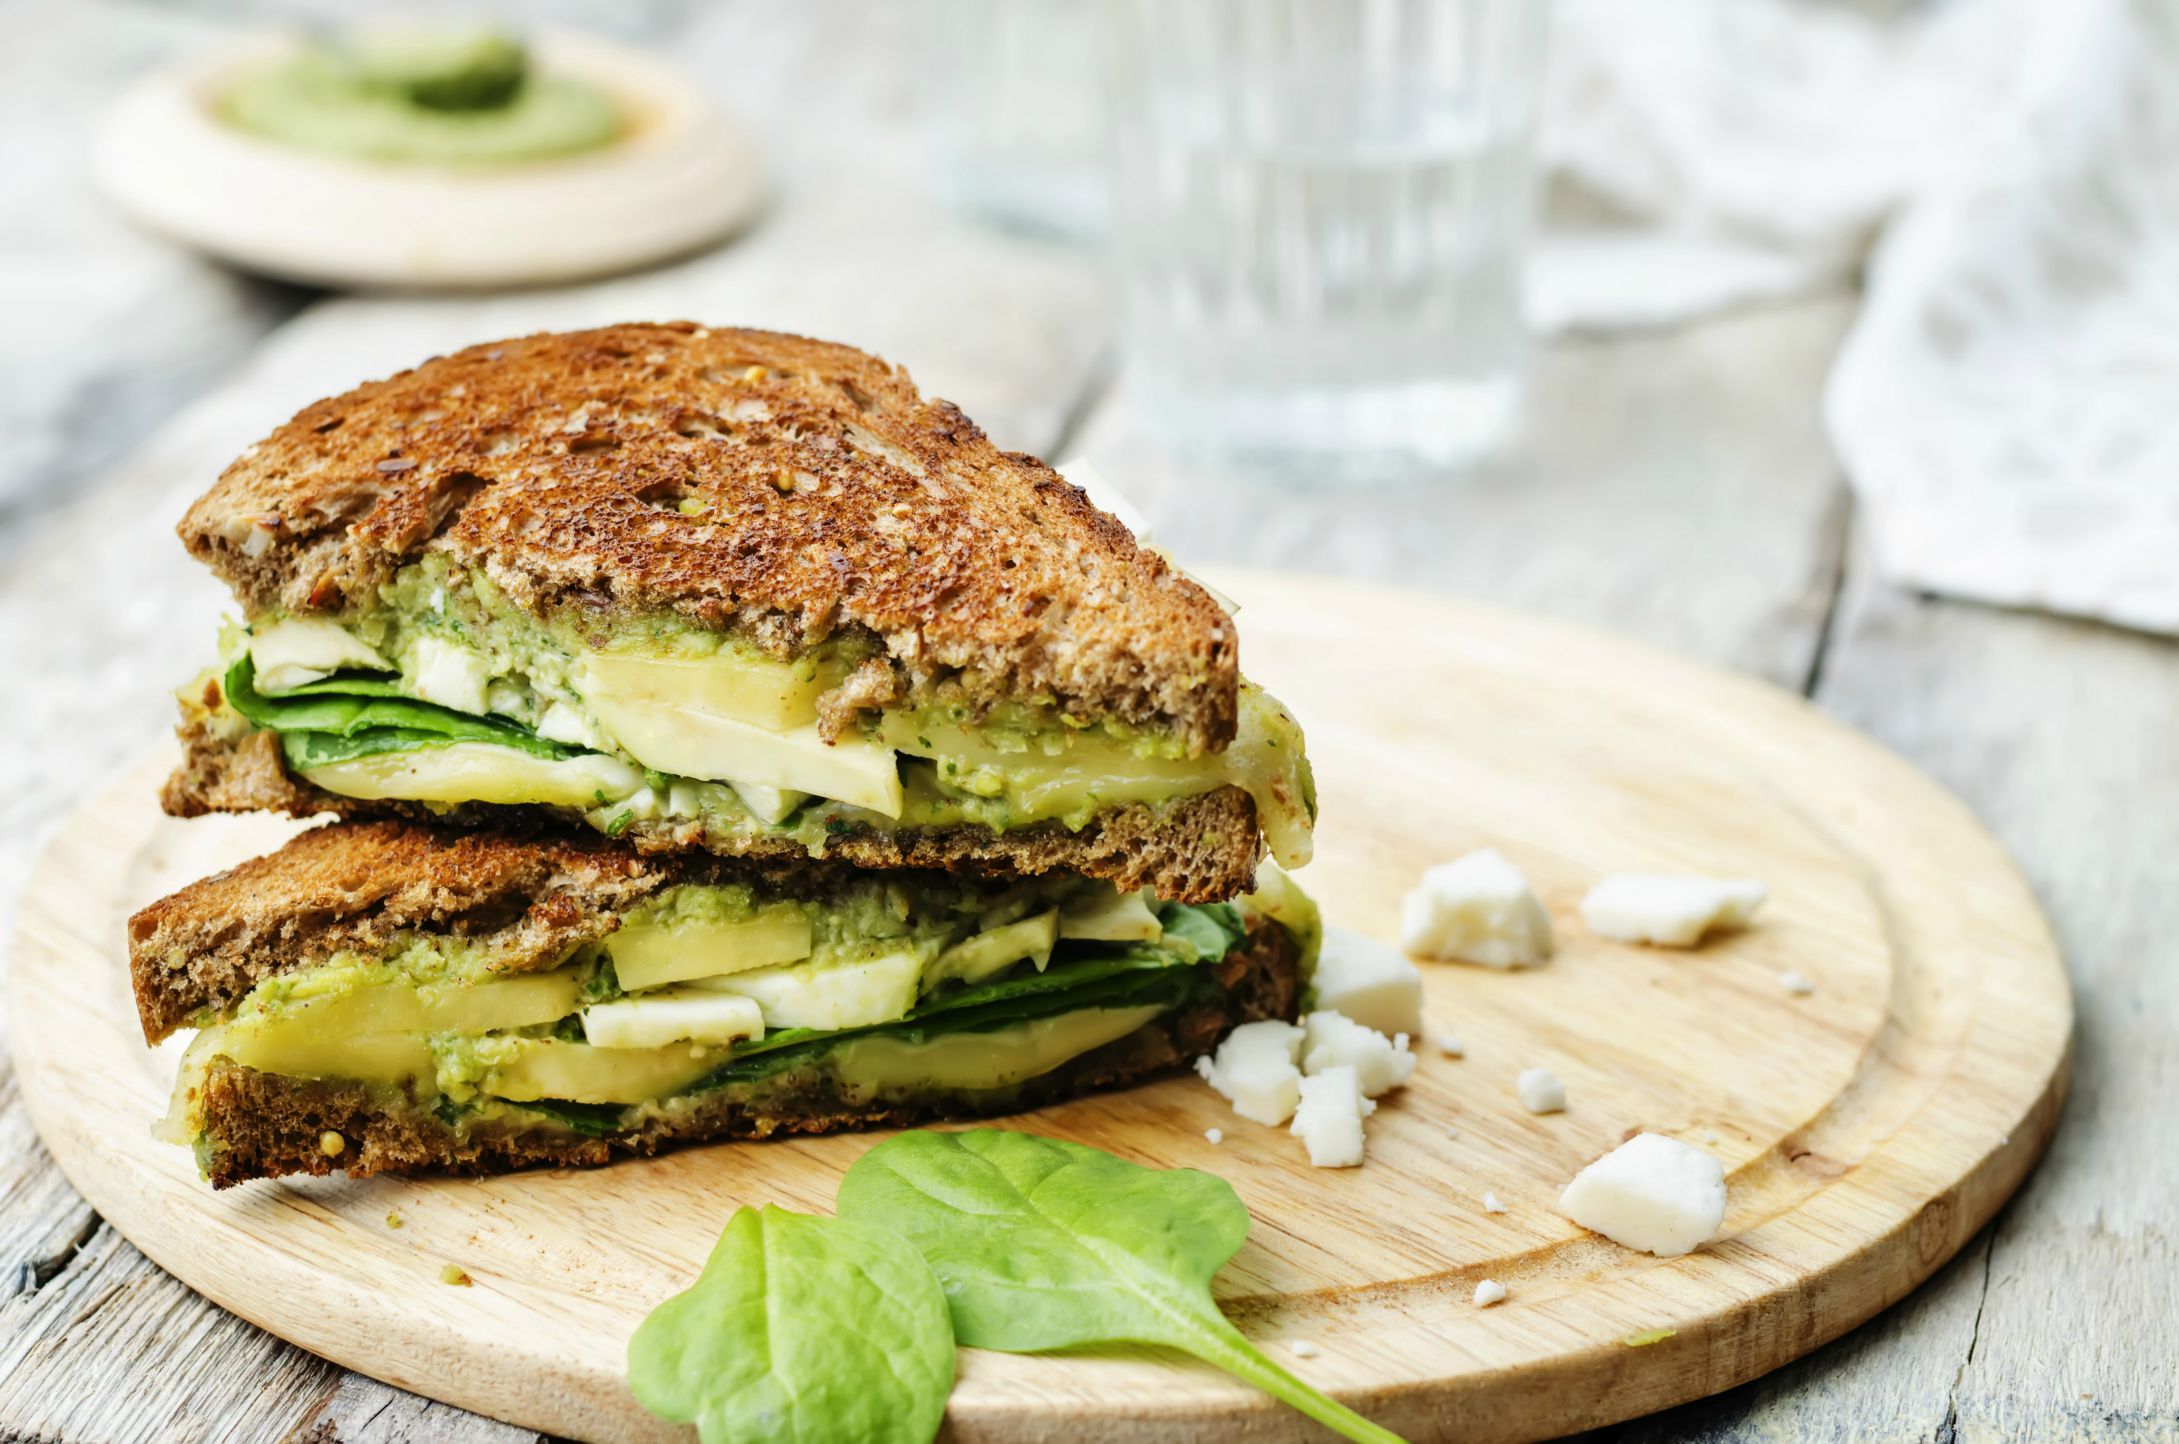 grilled rye sandwiches with cheese, spinach, pesto, avocado and goat cheese. the toning. selective focus